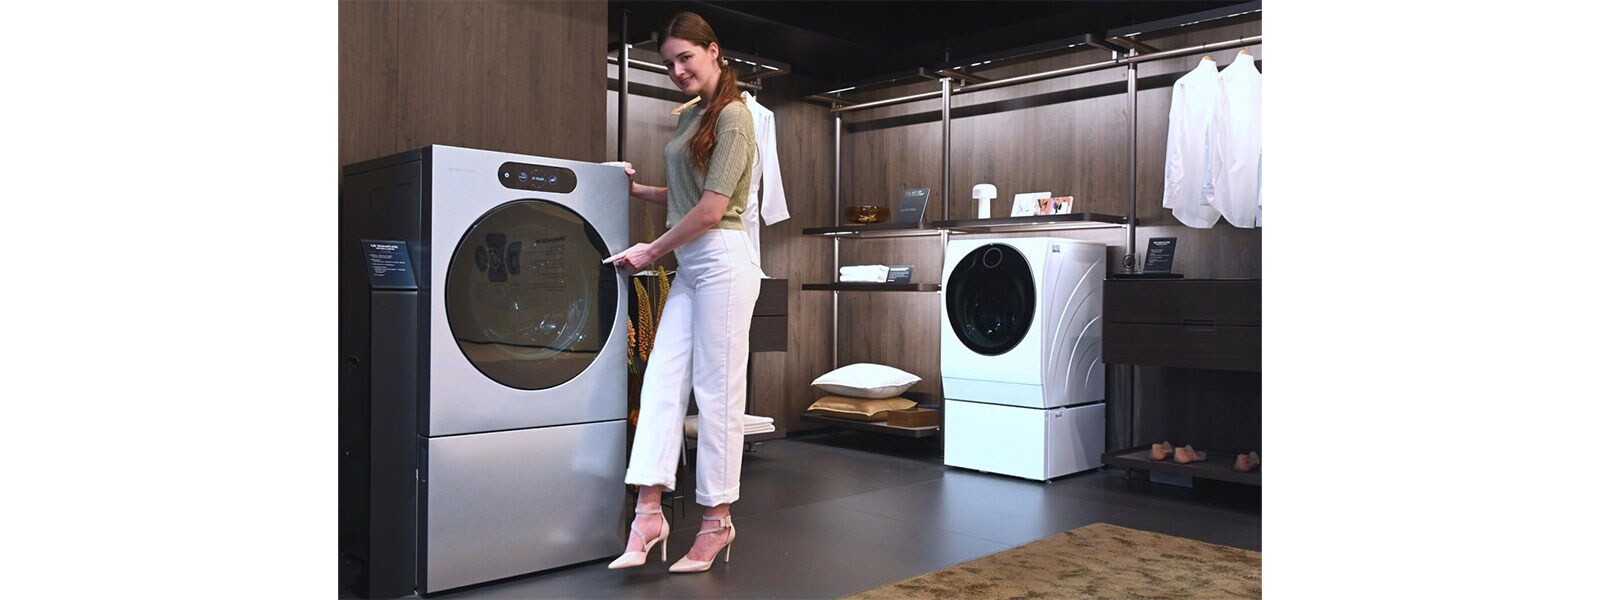 LG-SUSTAINABLE-LIFE-JOY-FOR-ALL-With-Latest-Home